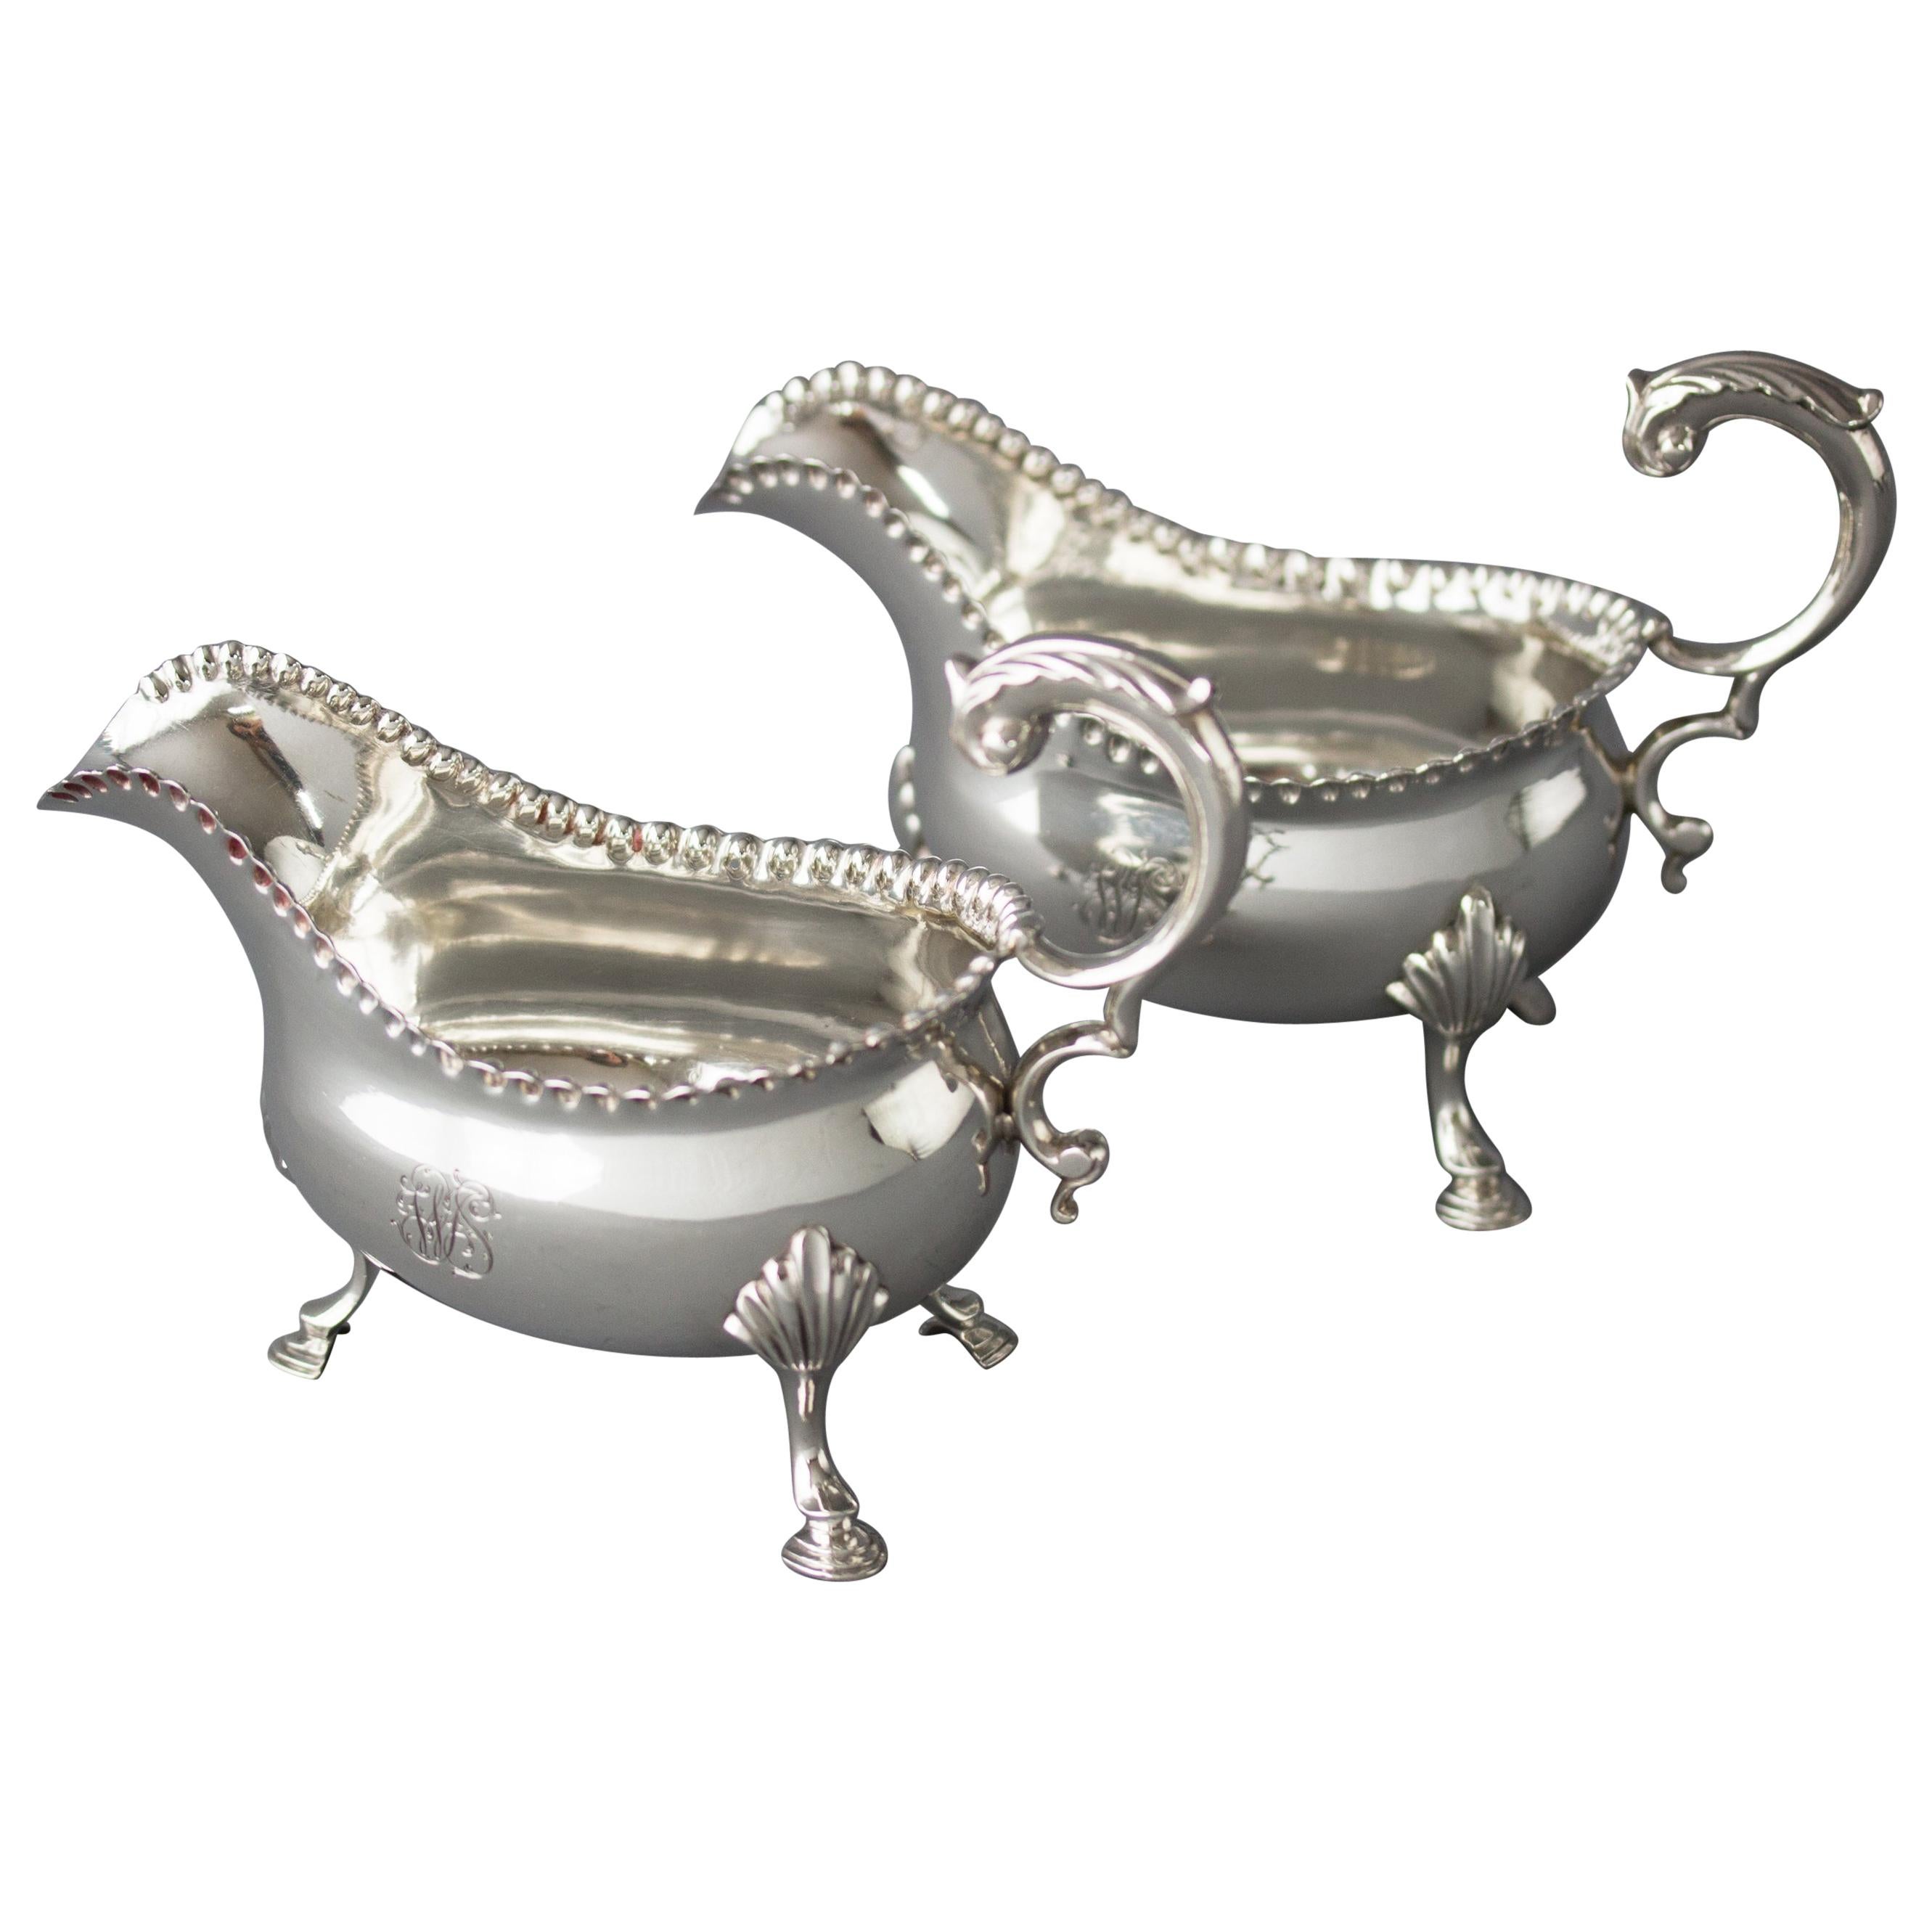 A Pair of George III Silver Sauce Boats, London 1768 by W & J Priest